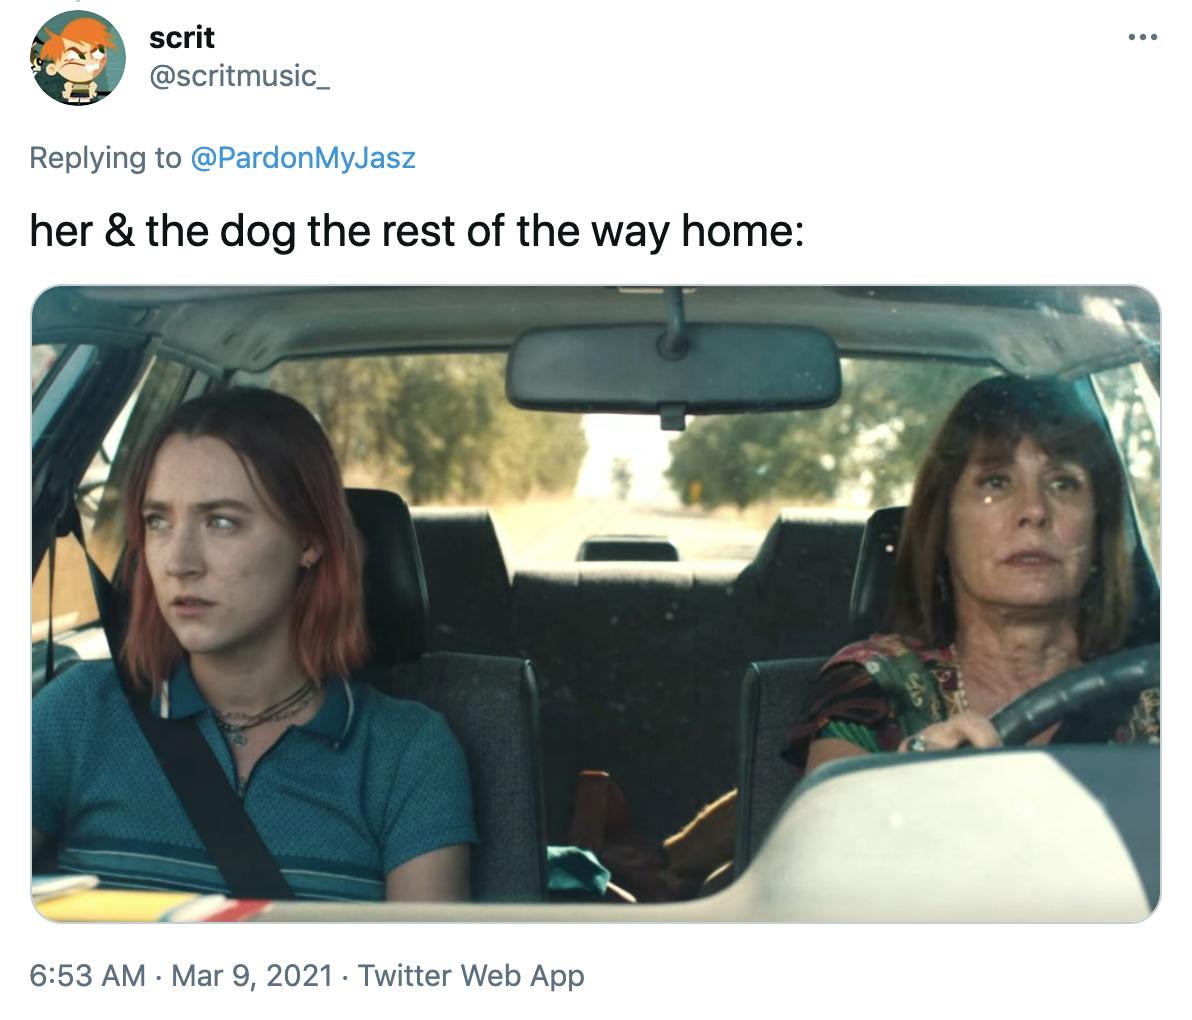 'her & the dog the rest of the way home:' A mother and daughter sit in awkward silence in a car